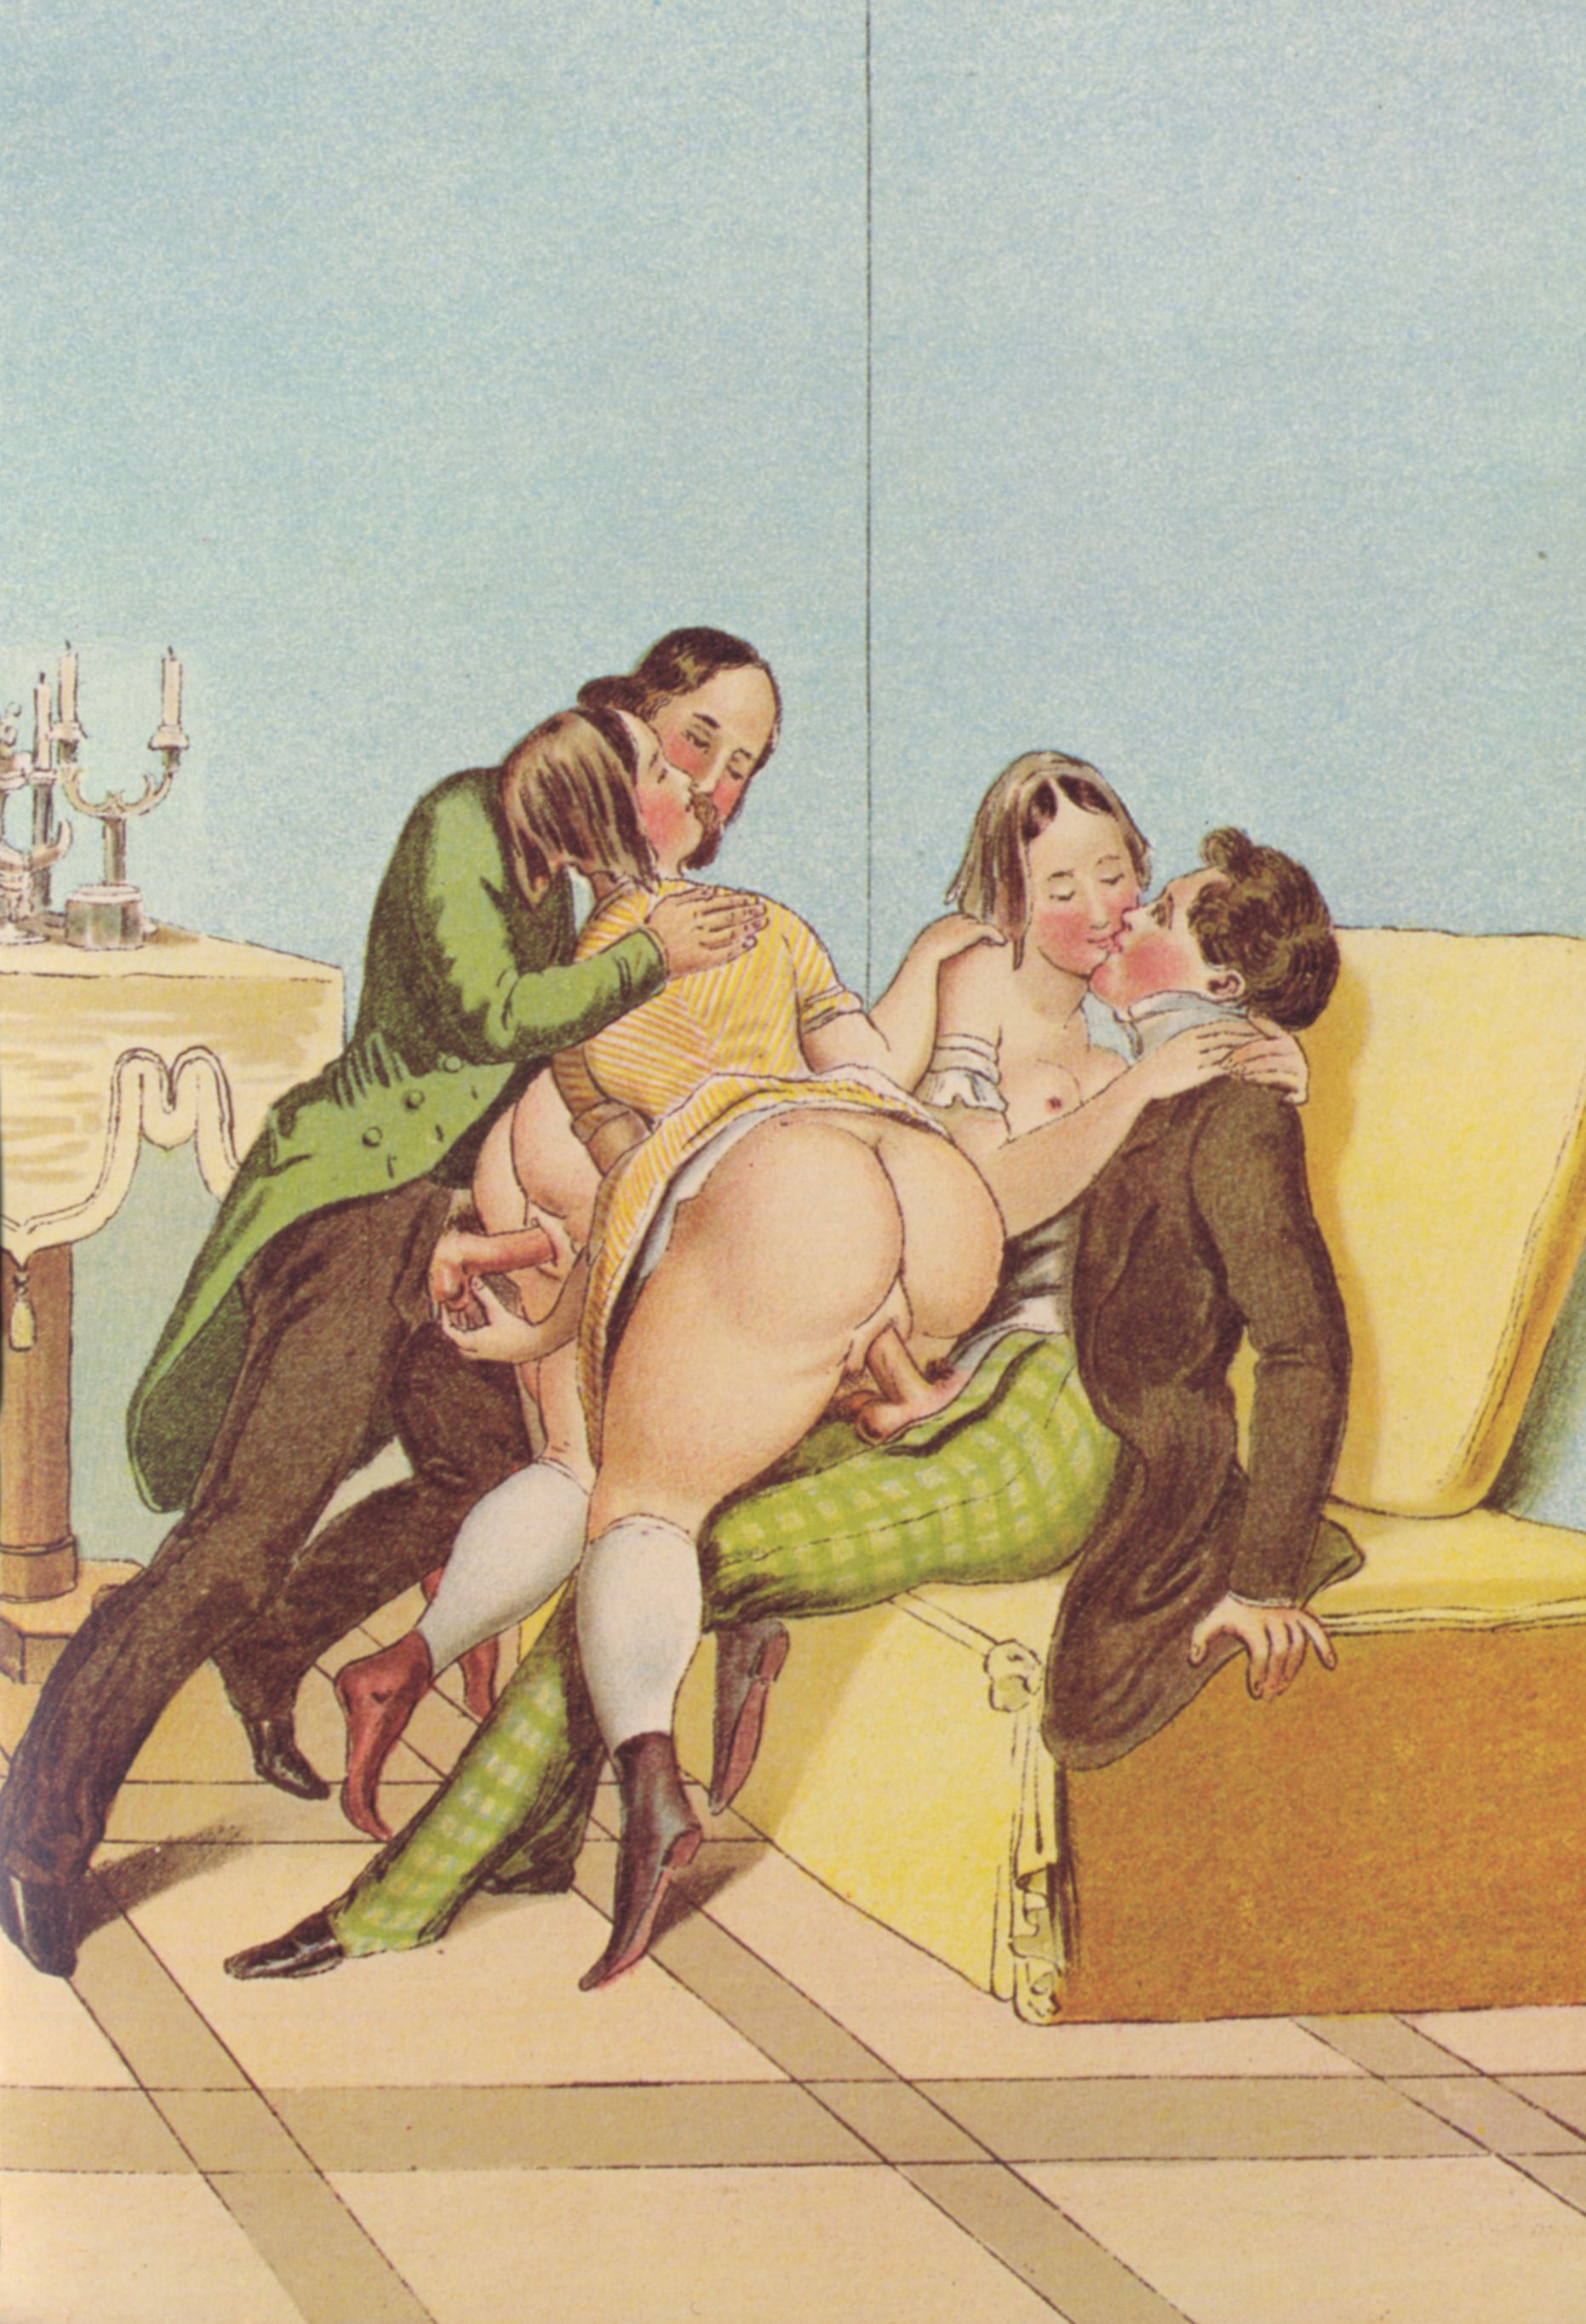 Peter Fendi Portrayed Group Sex In Lithography